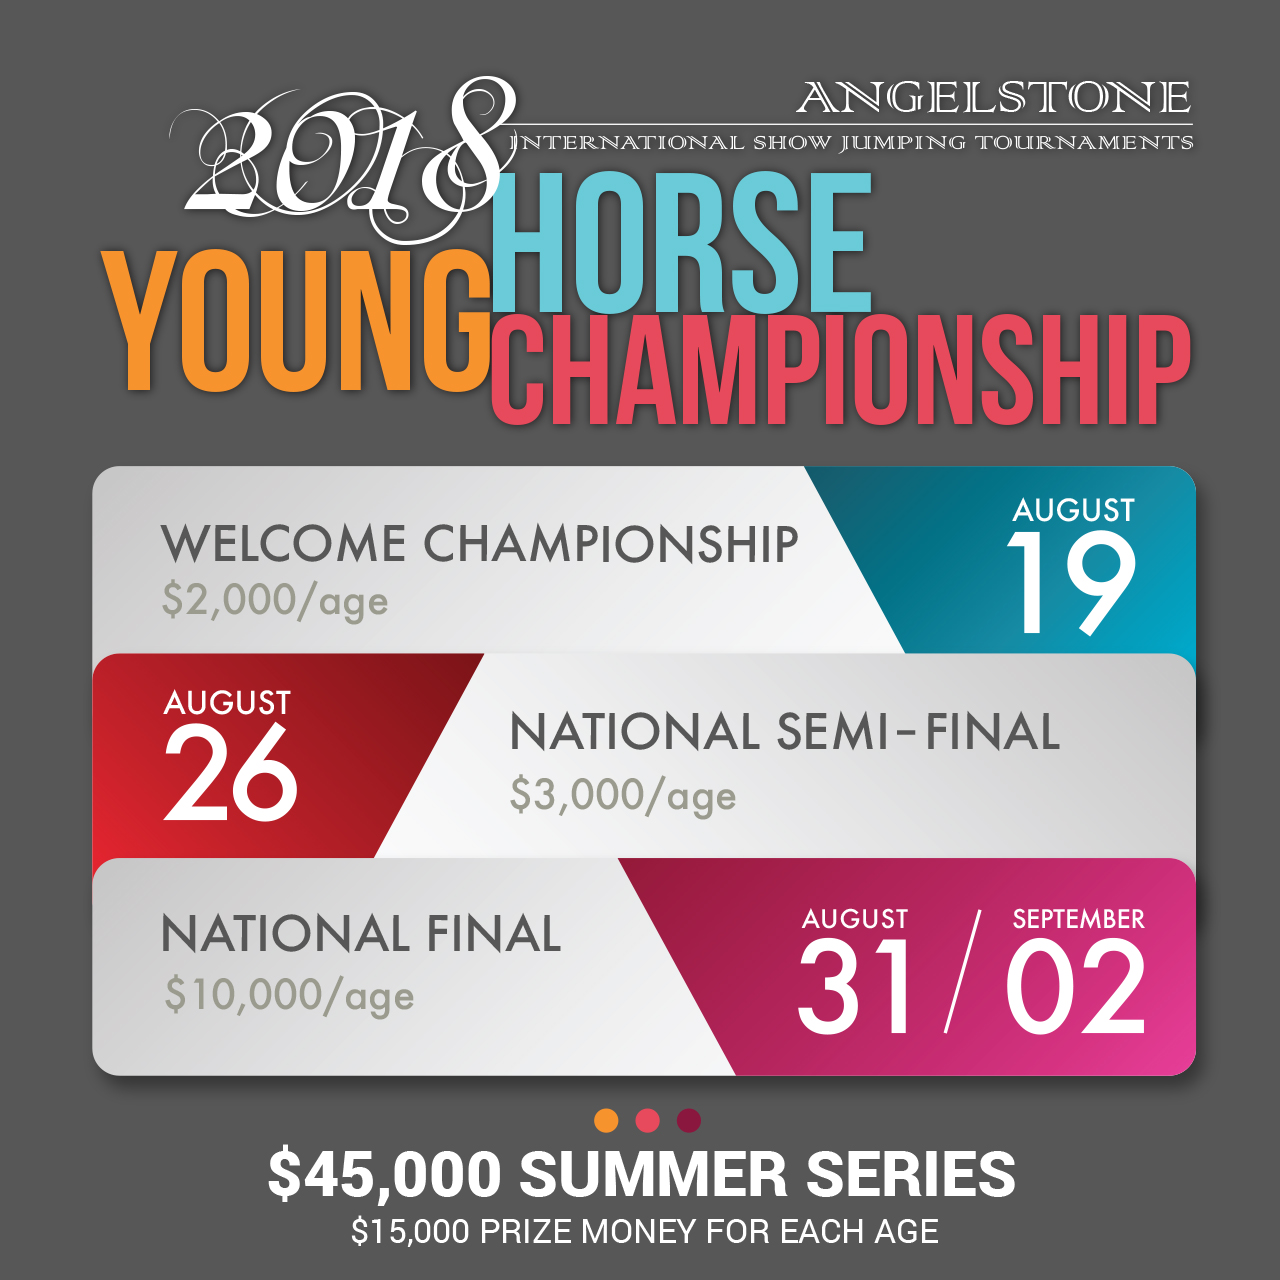 2018 Young Horse Championship $45,000 Summer Series